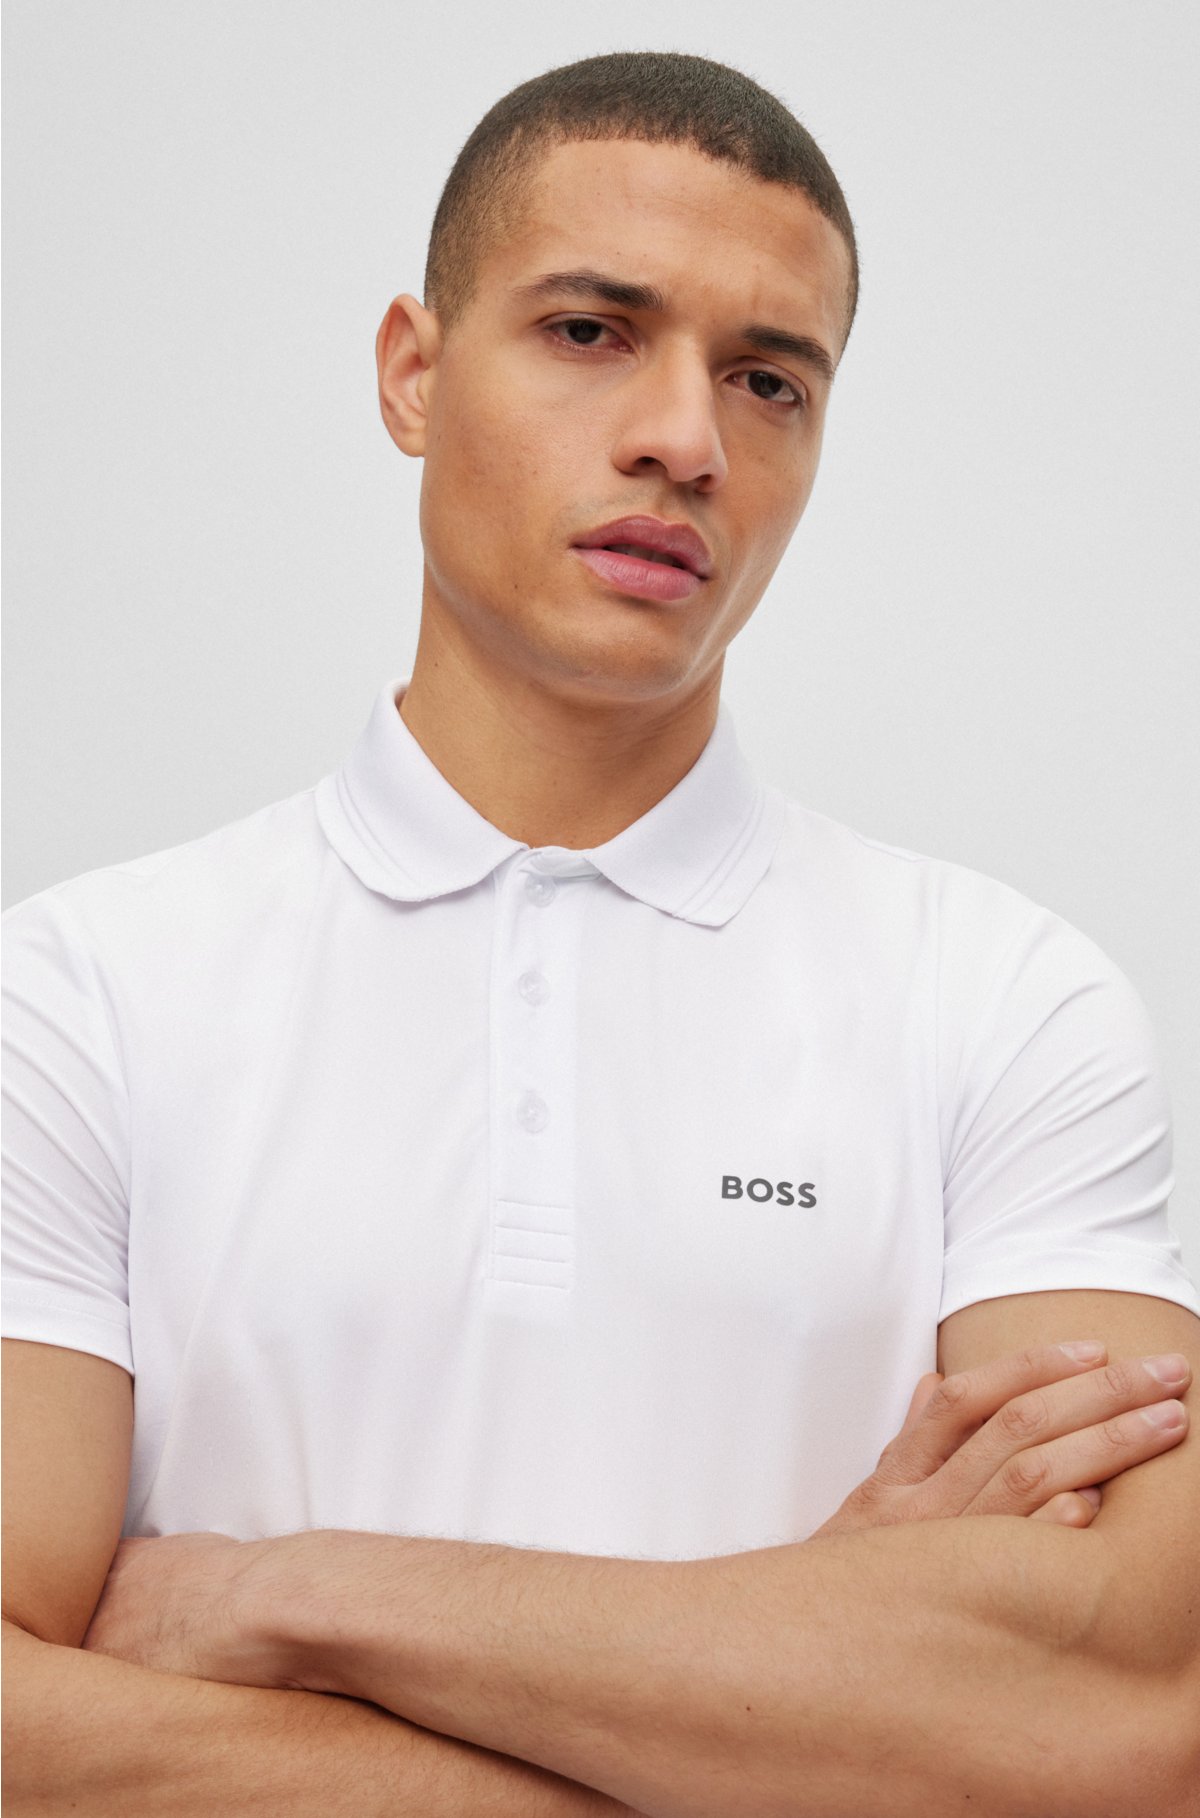 Why You Need a Performance Polo Shirt